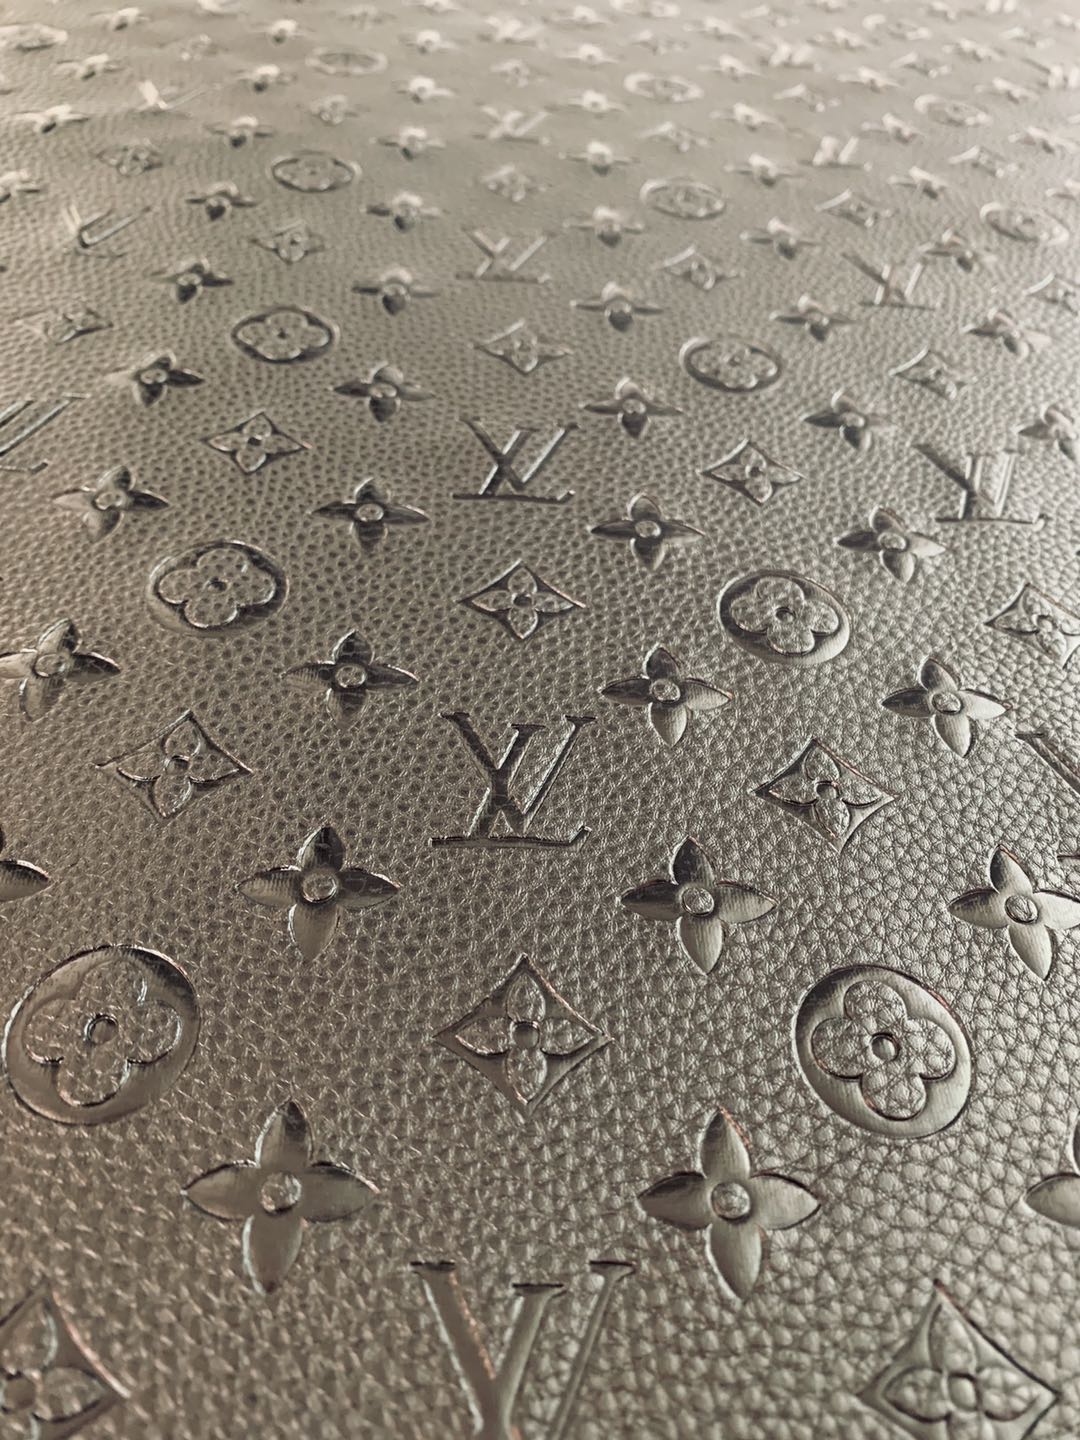 Fashion Embossed LV Crafting Leather Fabric For Handmade Bags ,Shoes and DIY Handicrafts By Yards (Black)